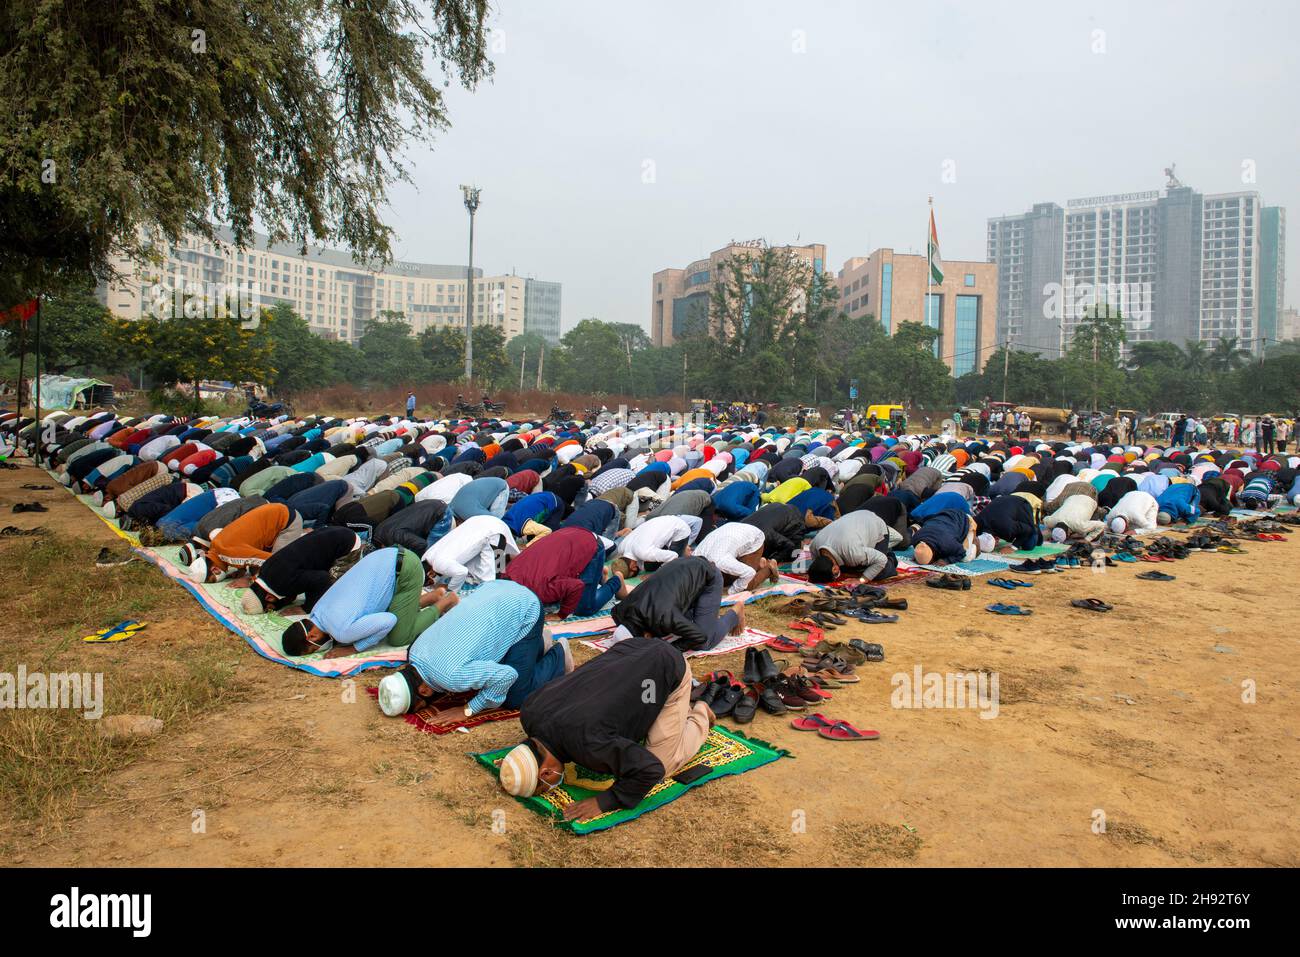 Indian Muslims perform Friday prayers in an open Ground at the designated place in Gurgaon.Officially designated open area is allotted for offering Friday prayers. (Photo by Pradeep Gaur / SOPA Images/Sipa USA) Stock Photo